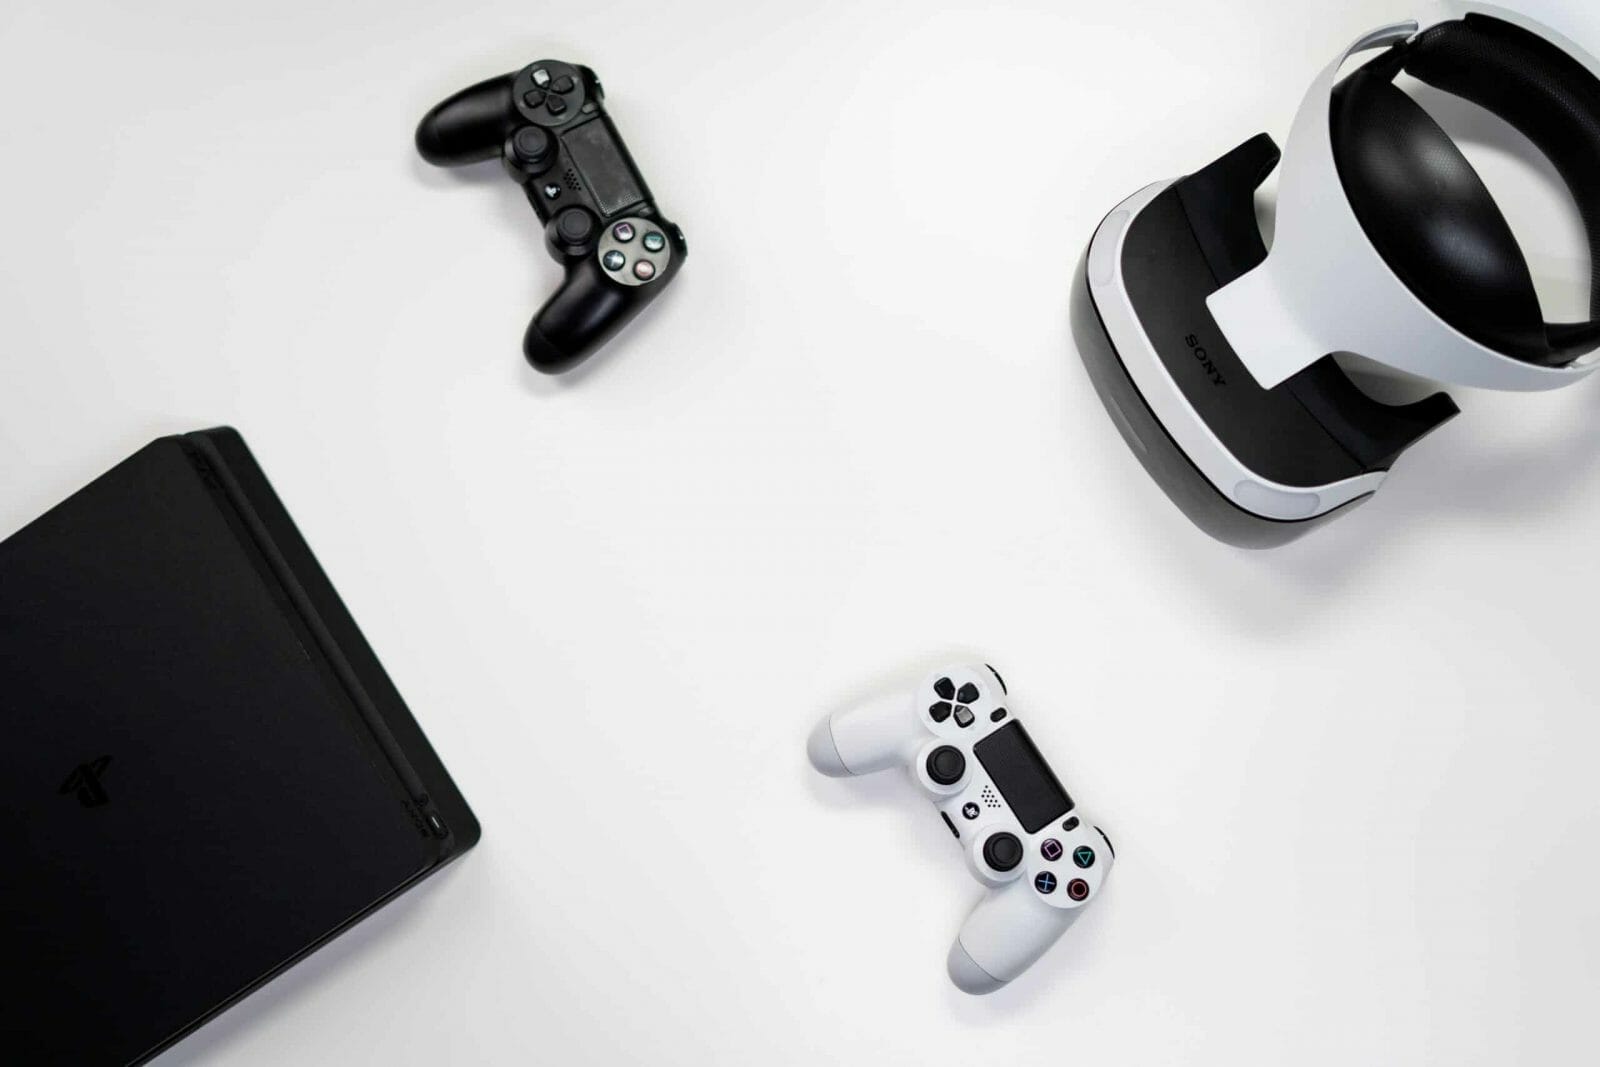 An image showing a Console alongside controllers and a VR headset